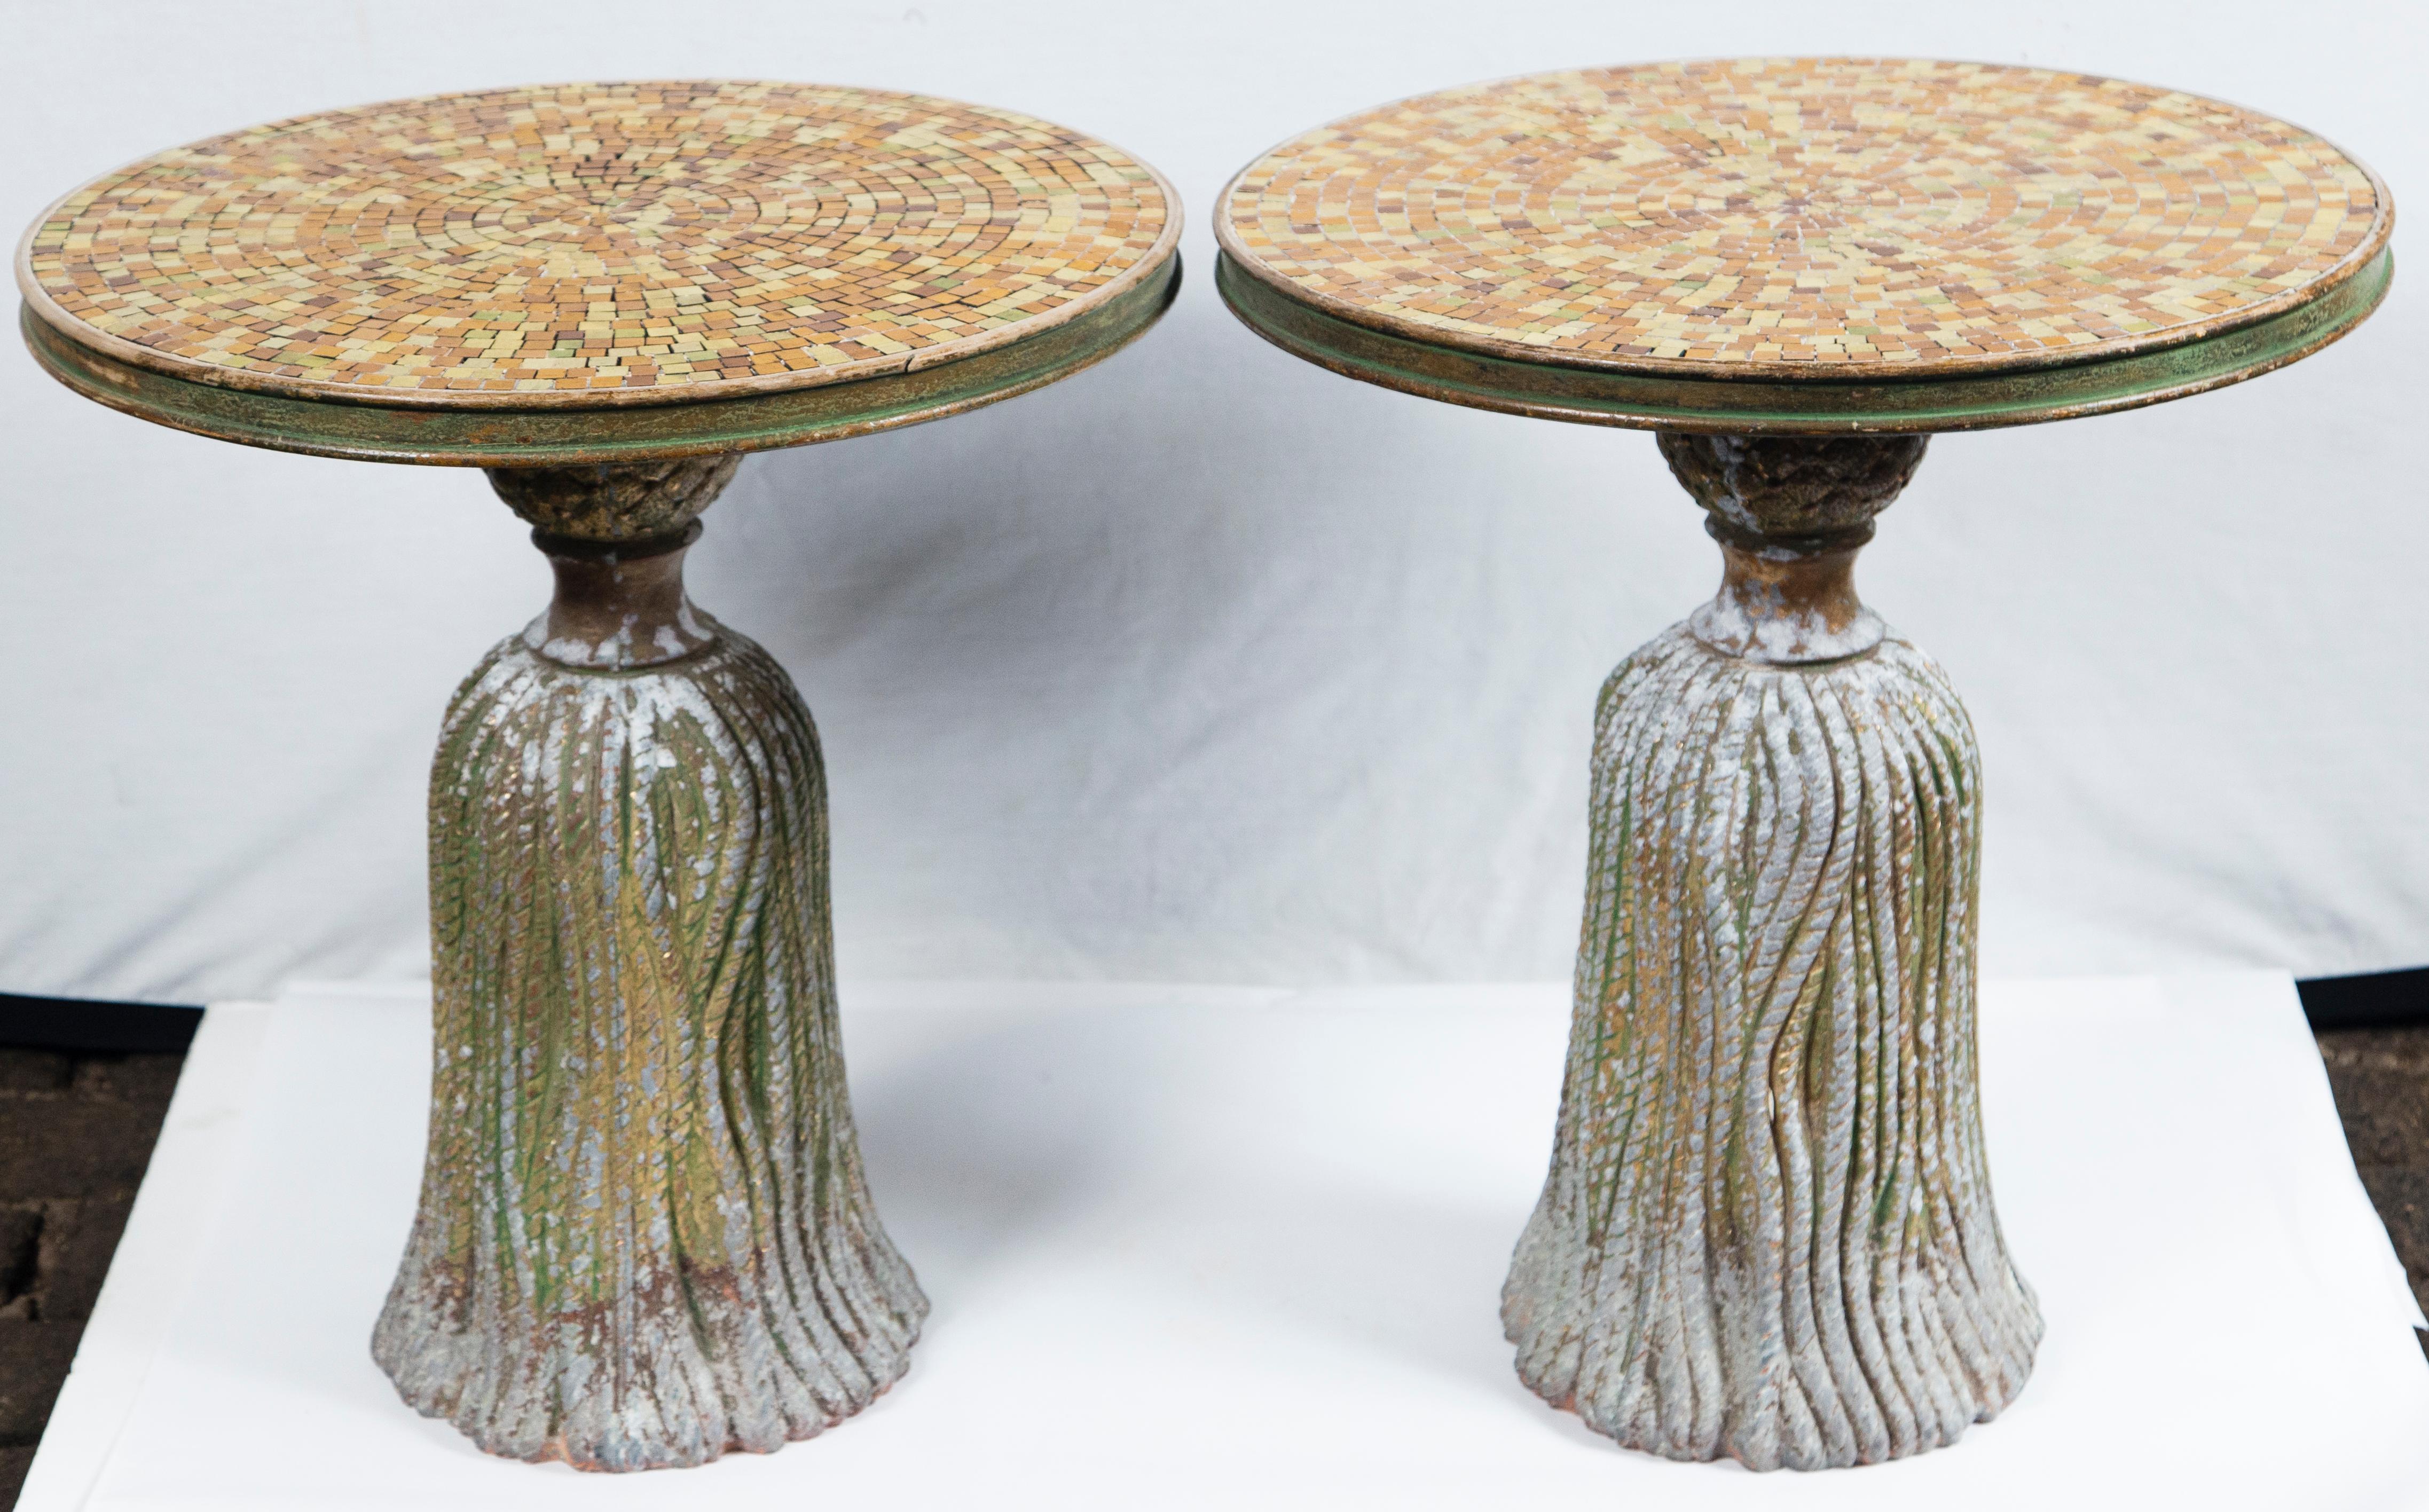 Pair of gold ceramic mosaic tile top tassel tables. Cast iron tassel shaped bases are cement filled for weight. Mosaic tops are edged with wood trim.